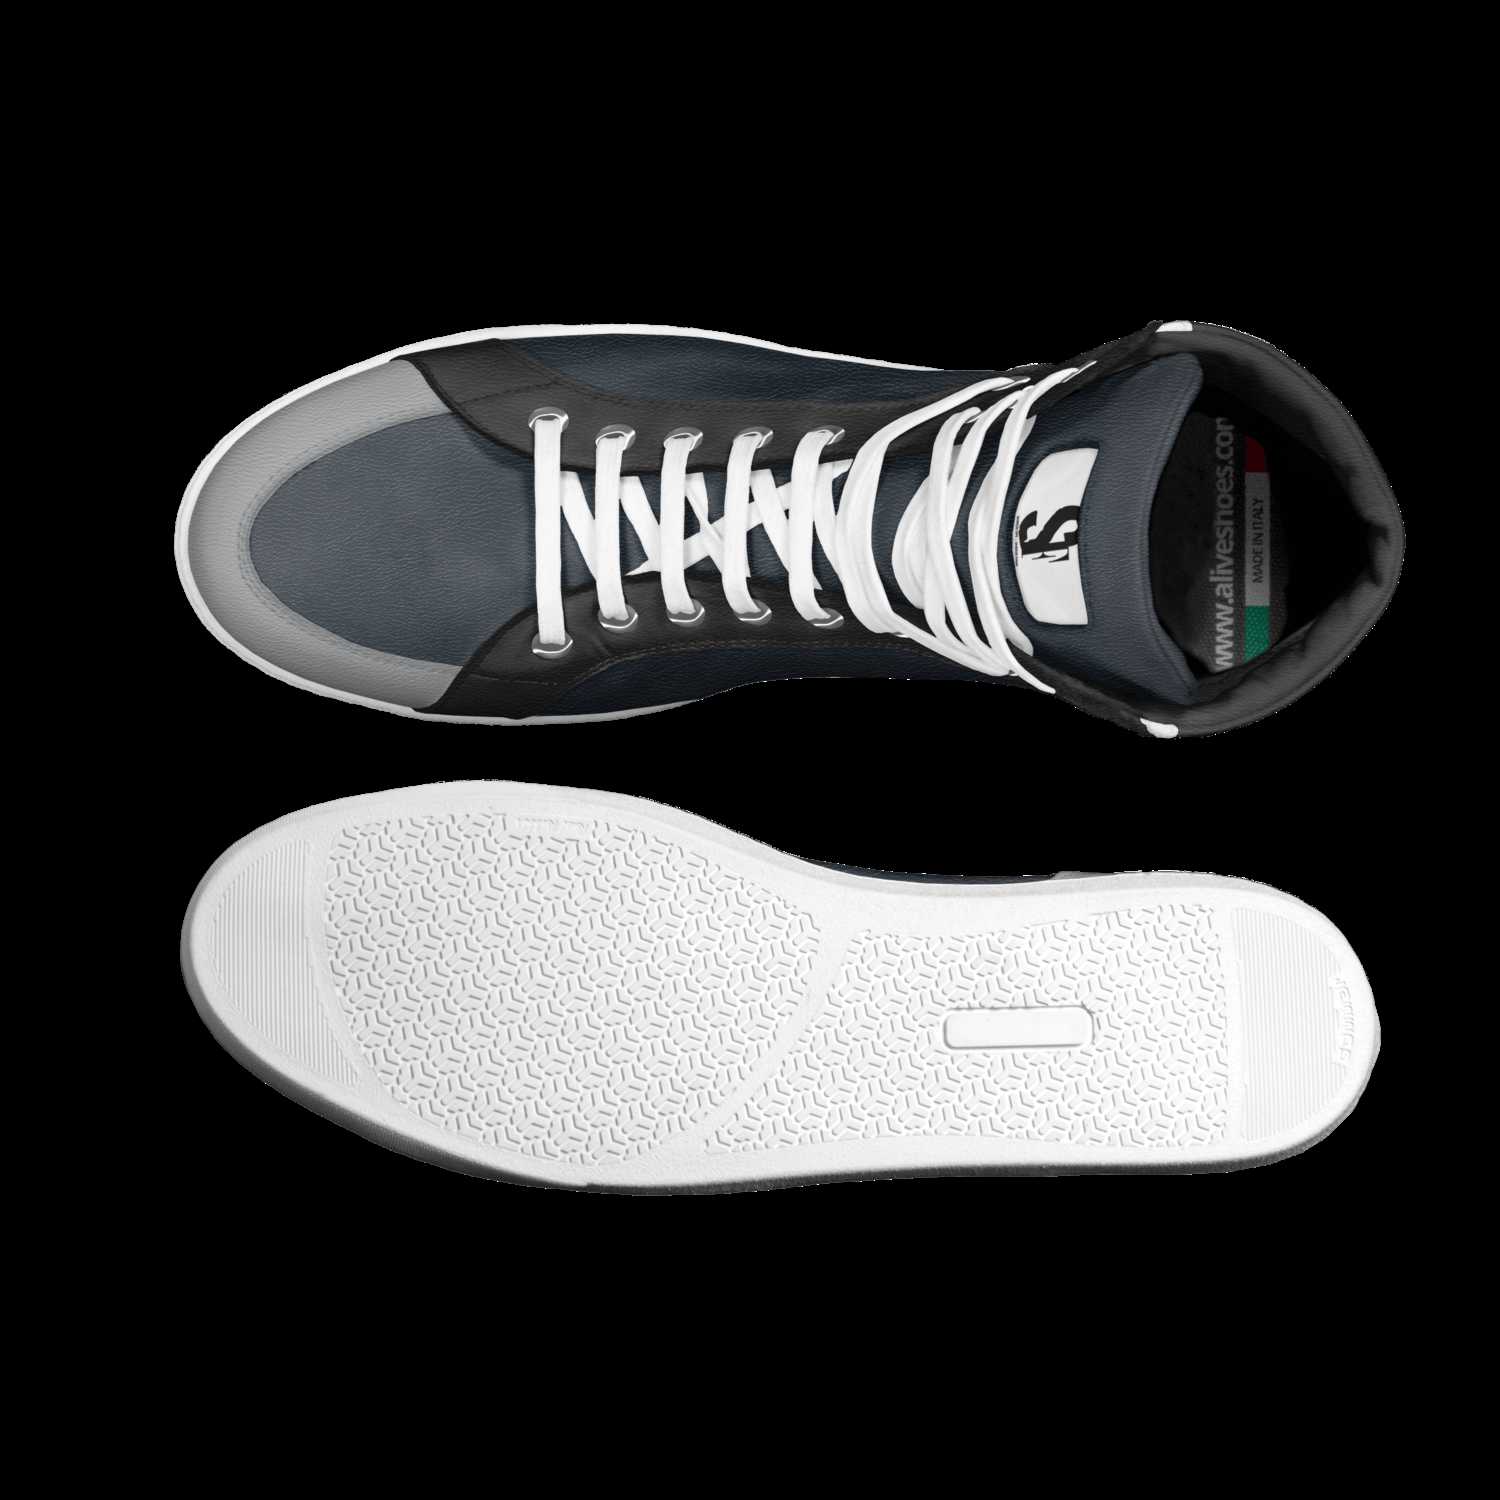 One of ones | A Custom Shoe concept by 